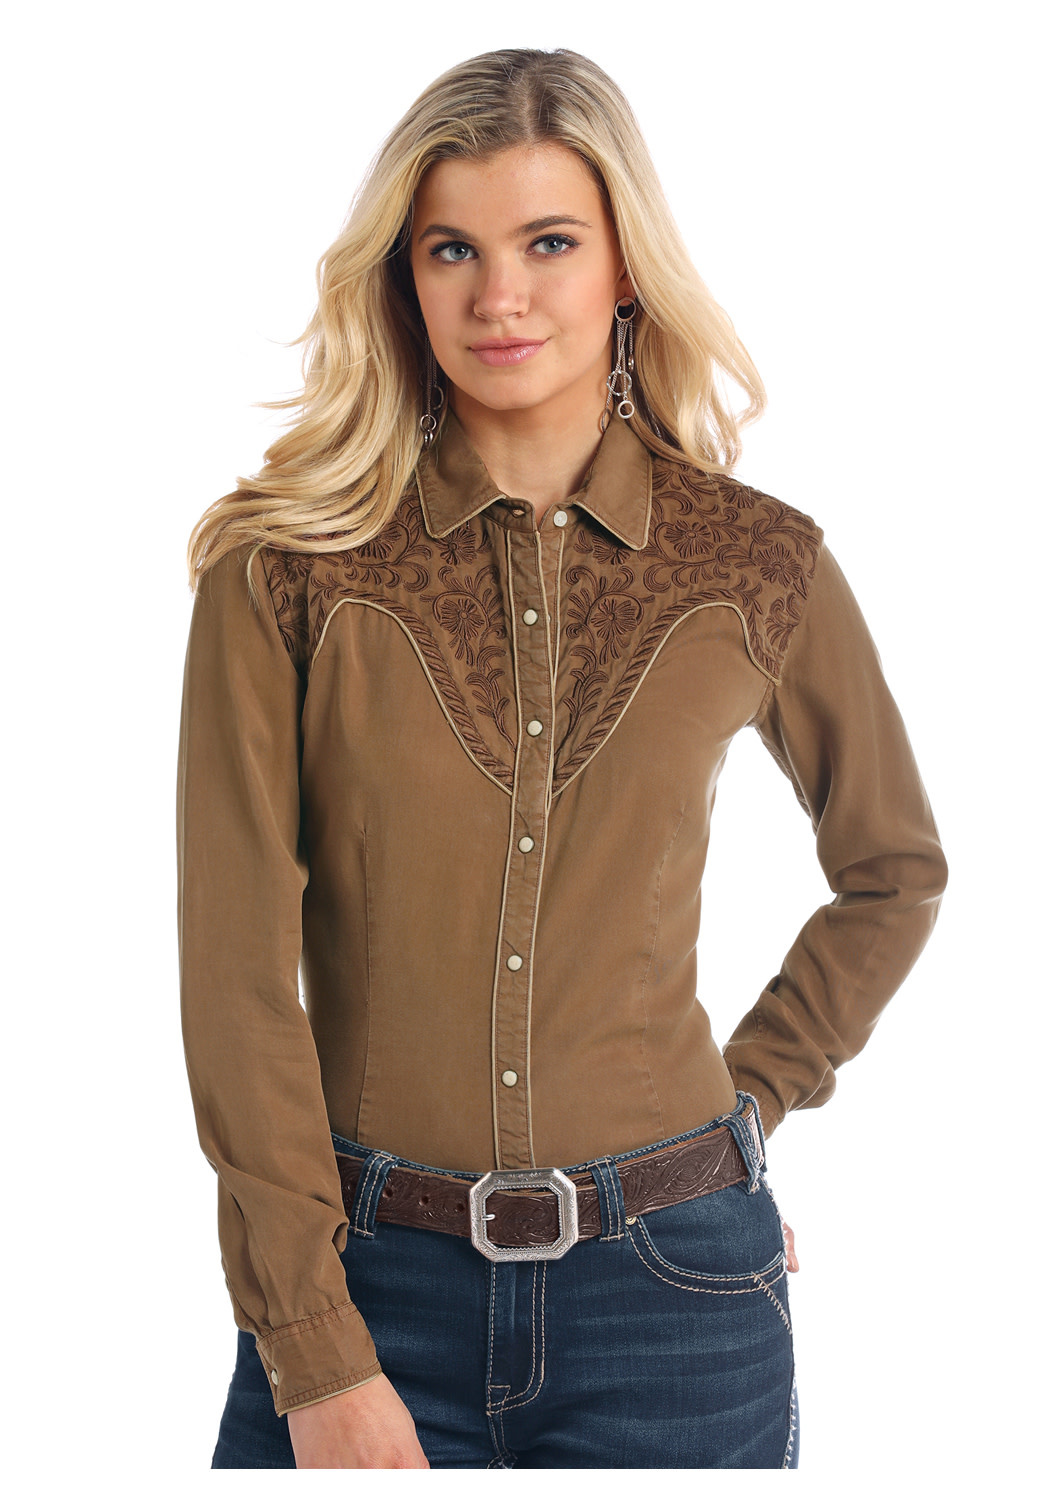 PANHANDLE BRN EMBROIDERED LS R4F2136 | Corral Western Wear